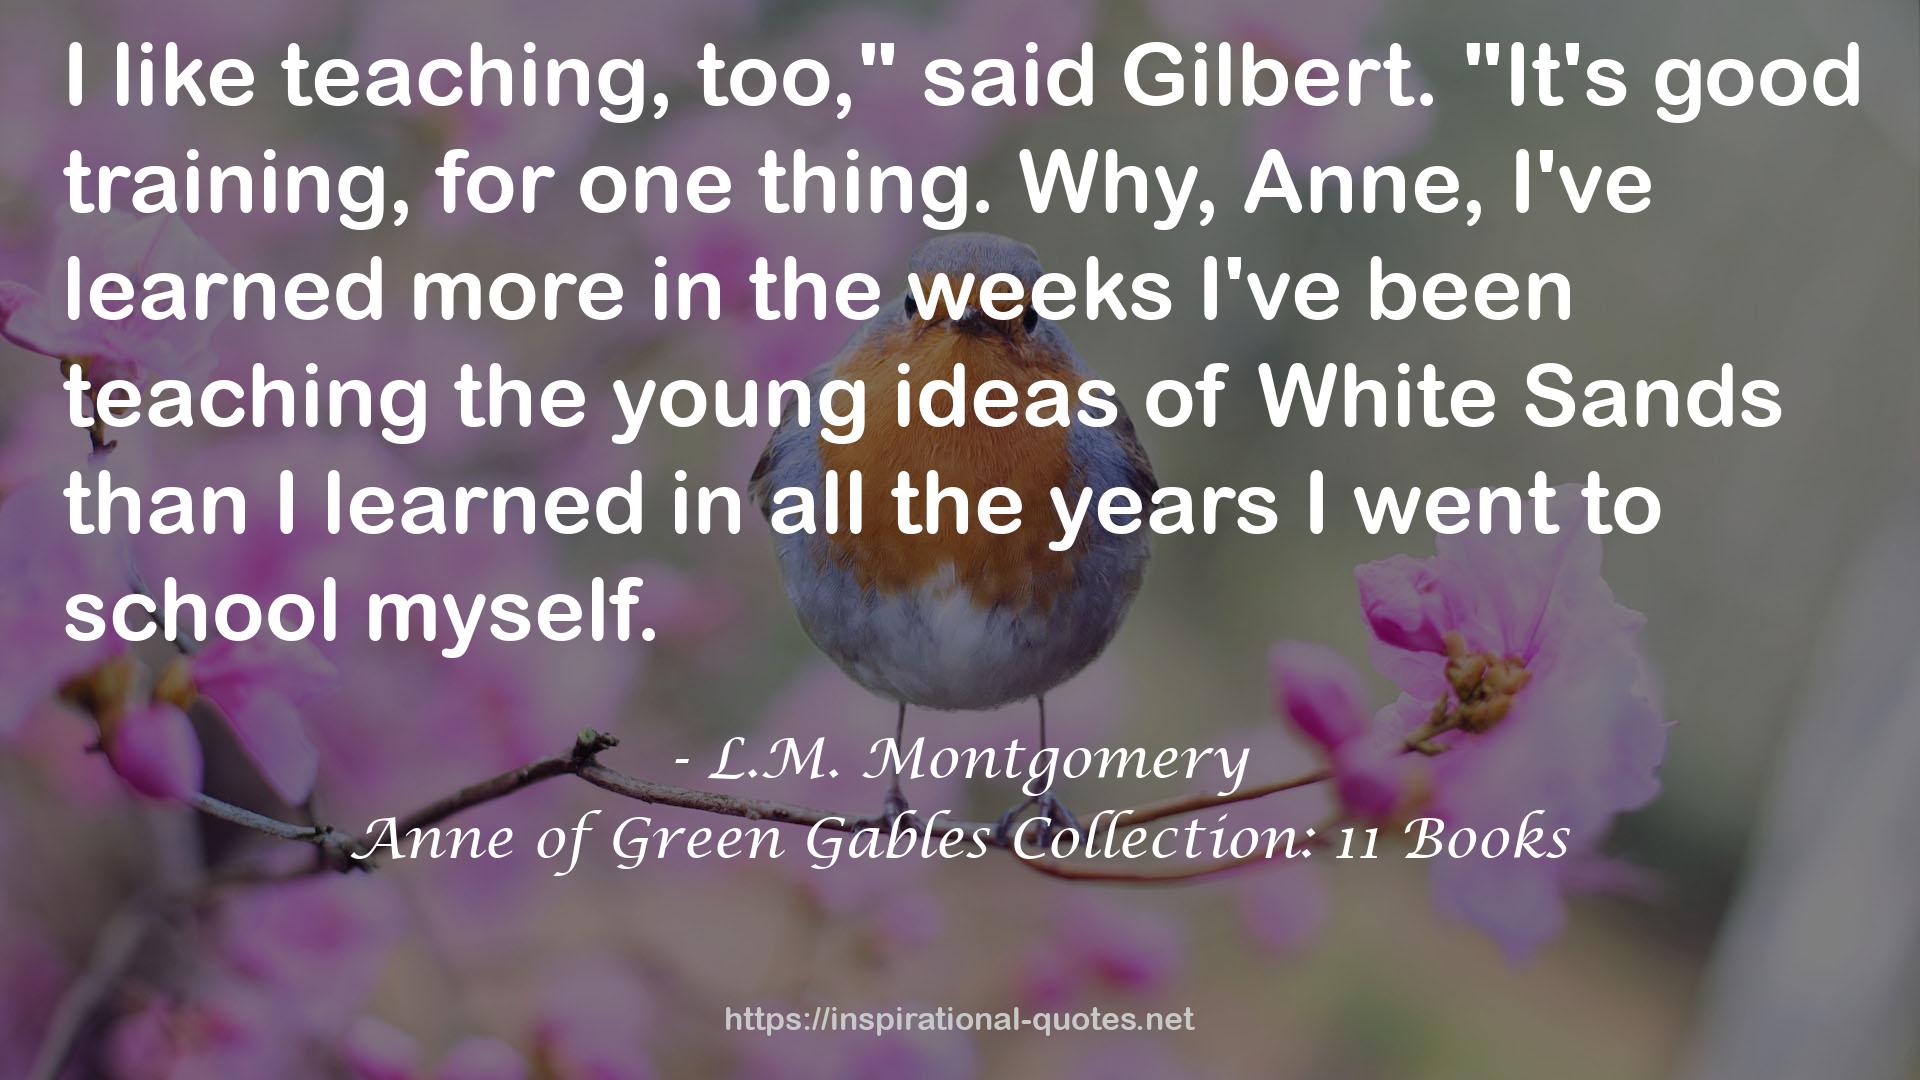 Anne of Green Gables Collection: 11 Books QUOTES